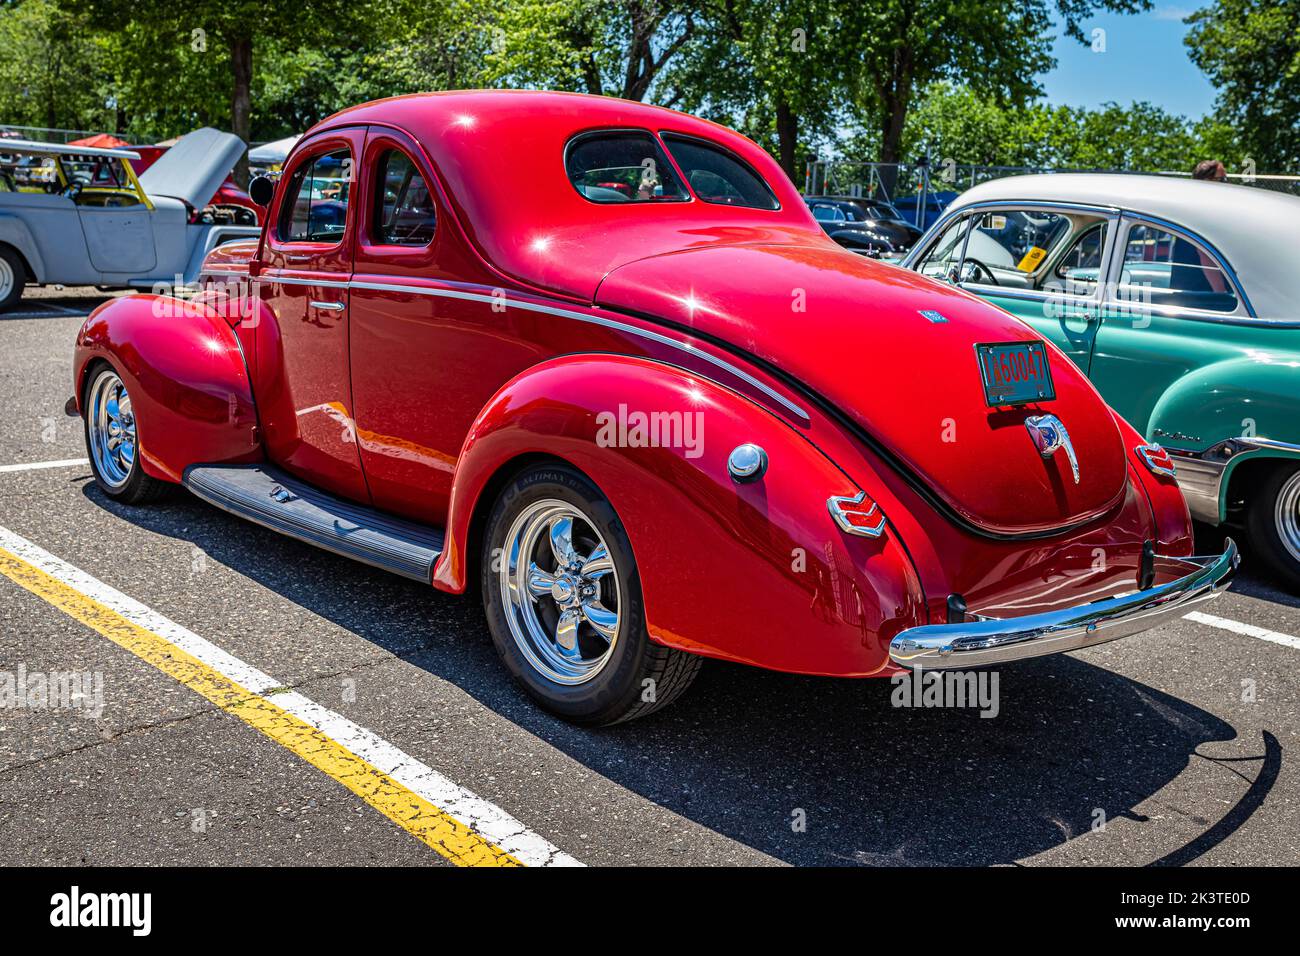 Falcon Heights, MN - June 18, 2022: High perspective rear corner view of a 1940 Ford Deluxe Flathead V8 Coupe at a local car show. Stock Photo